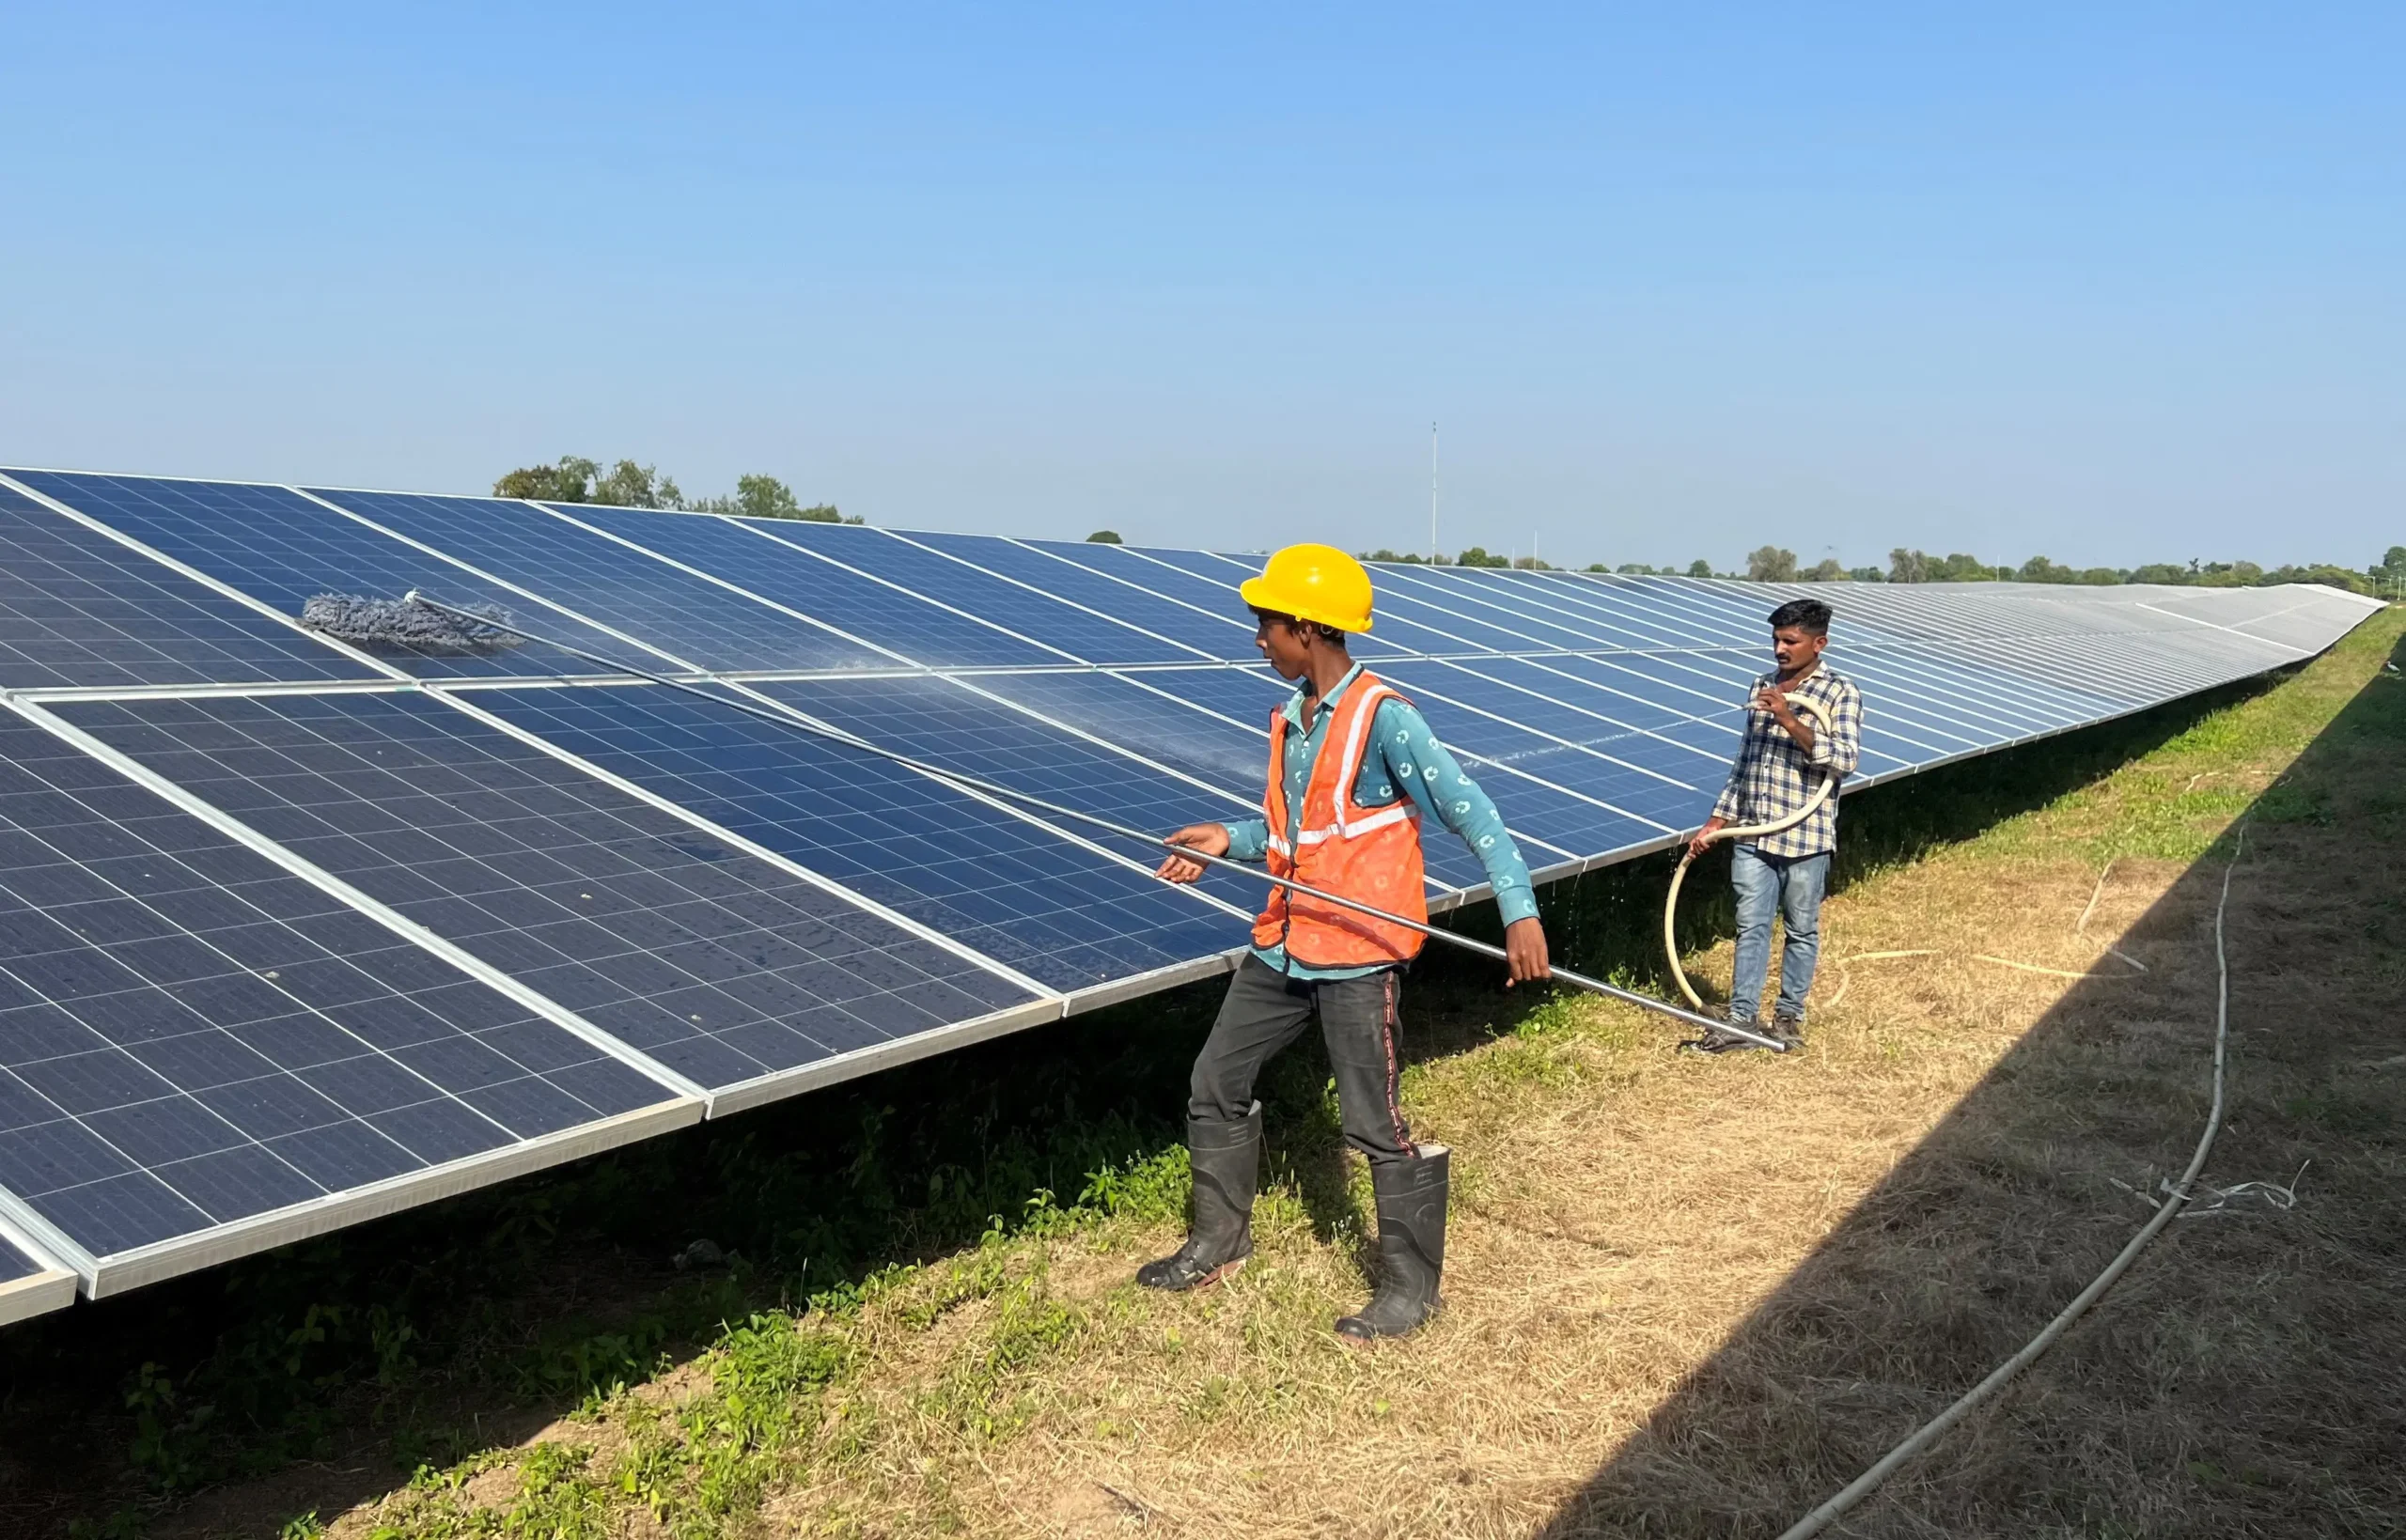 leading solar energy company in gujarat - Which is the largest solar plant in Gujarat